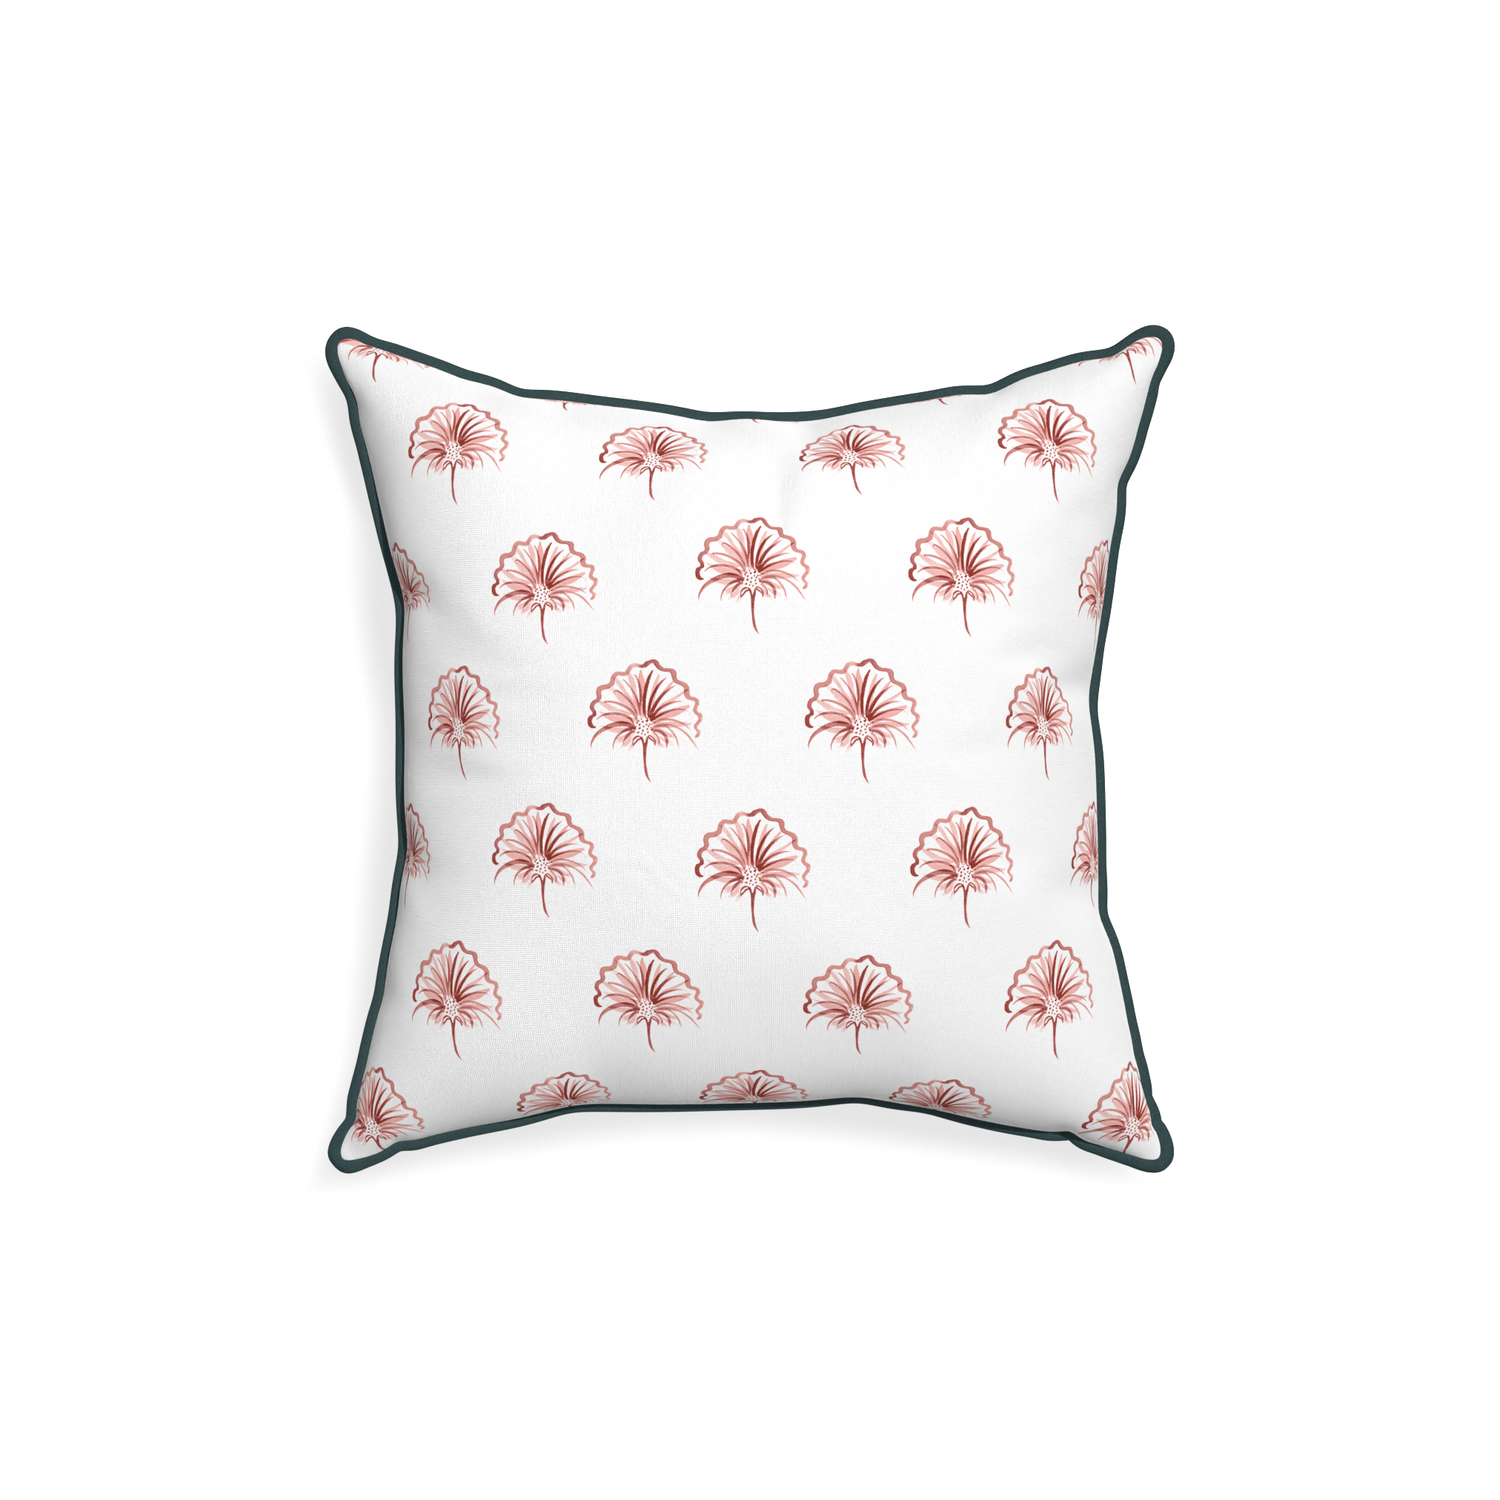 18-square penelope rose custom floral pinkpillow with p piping on white background